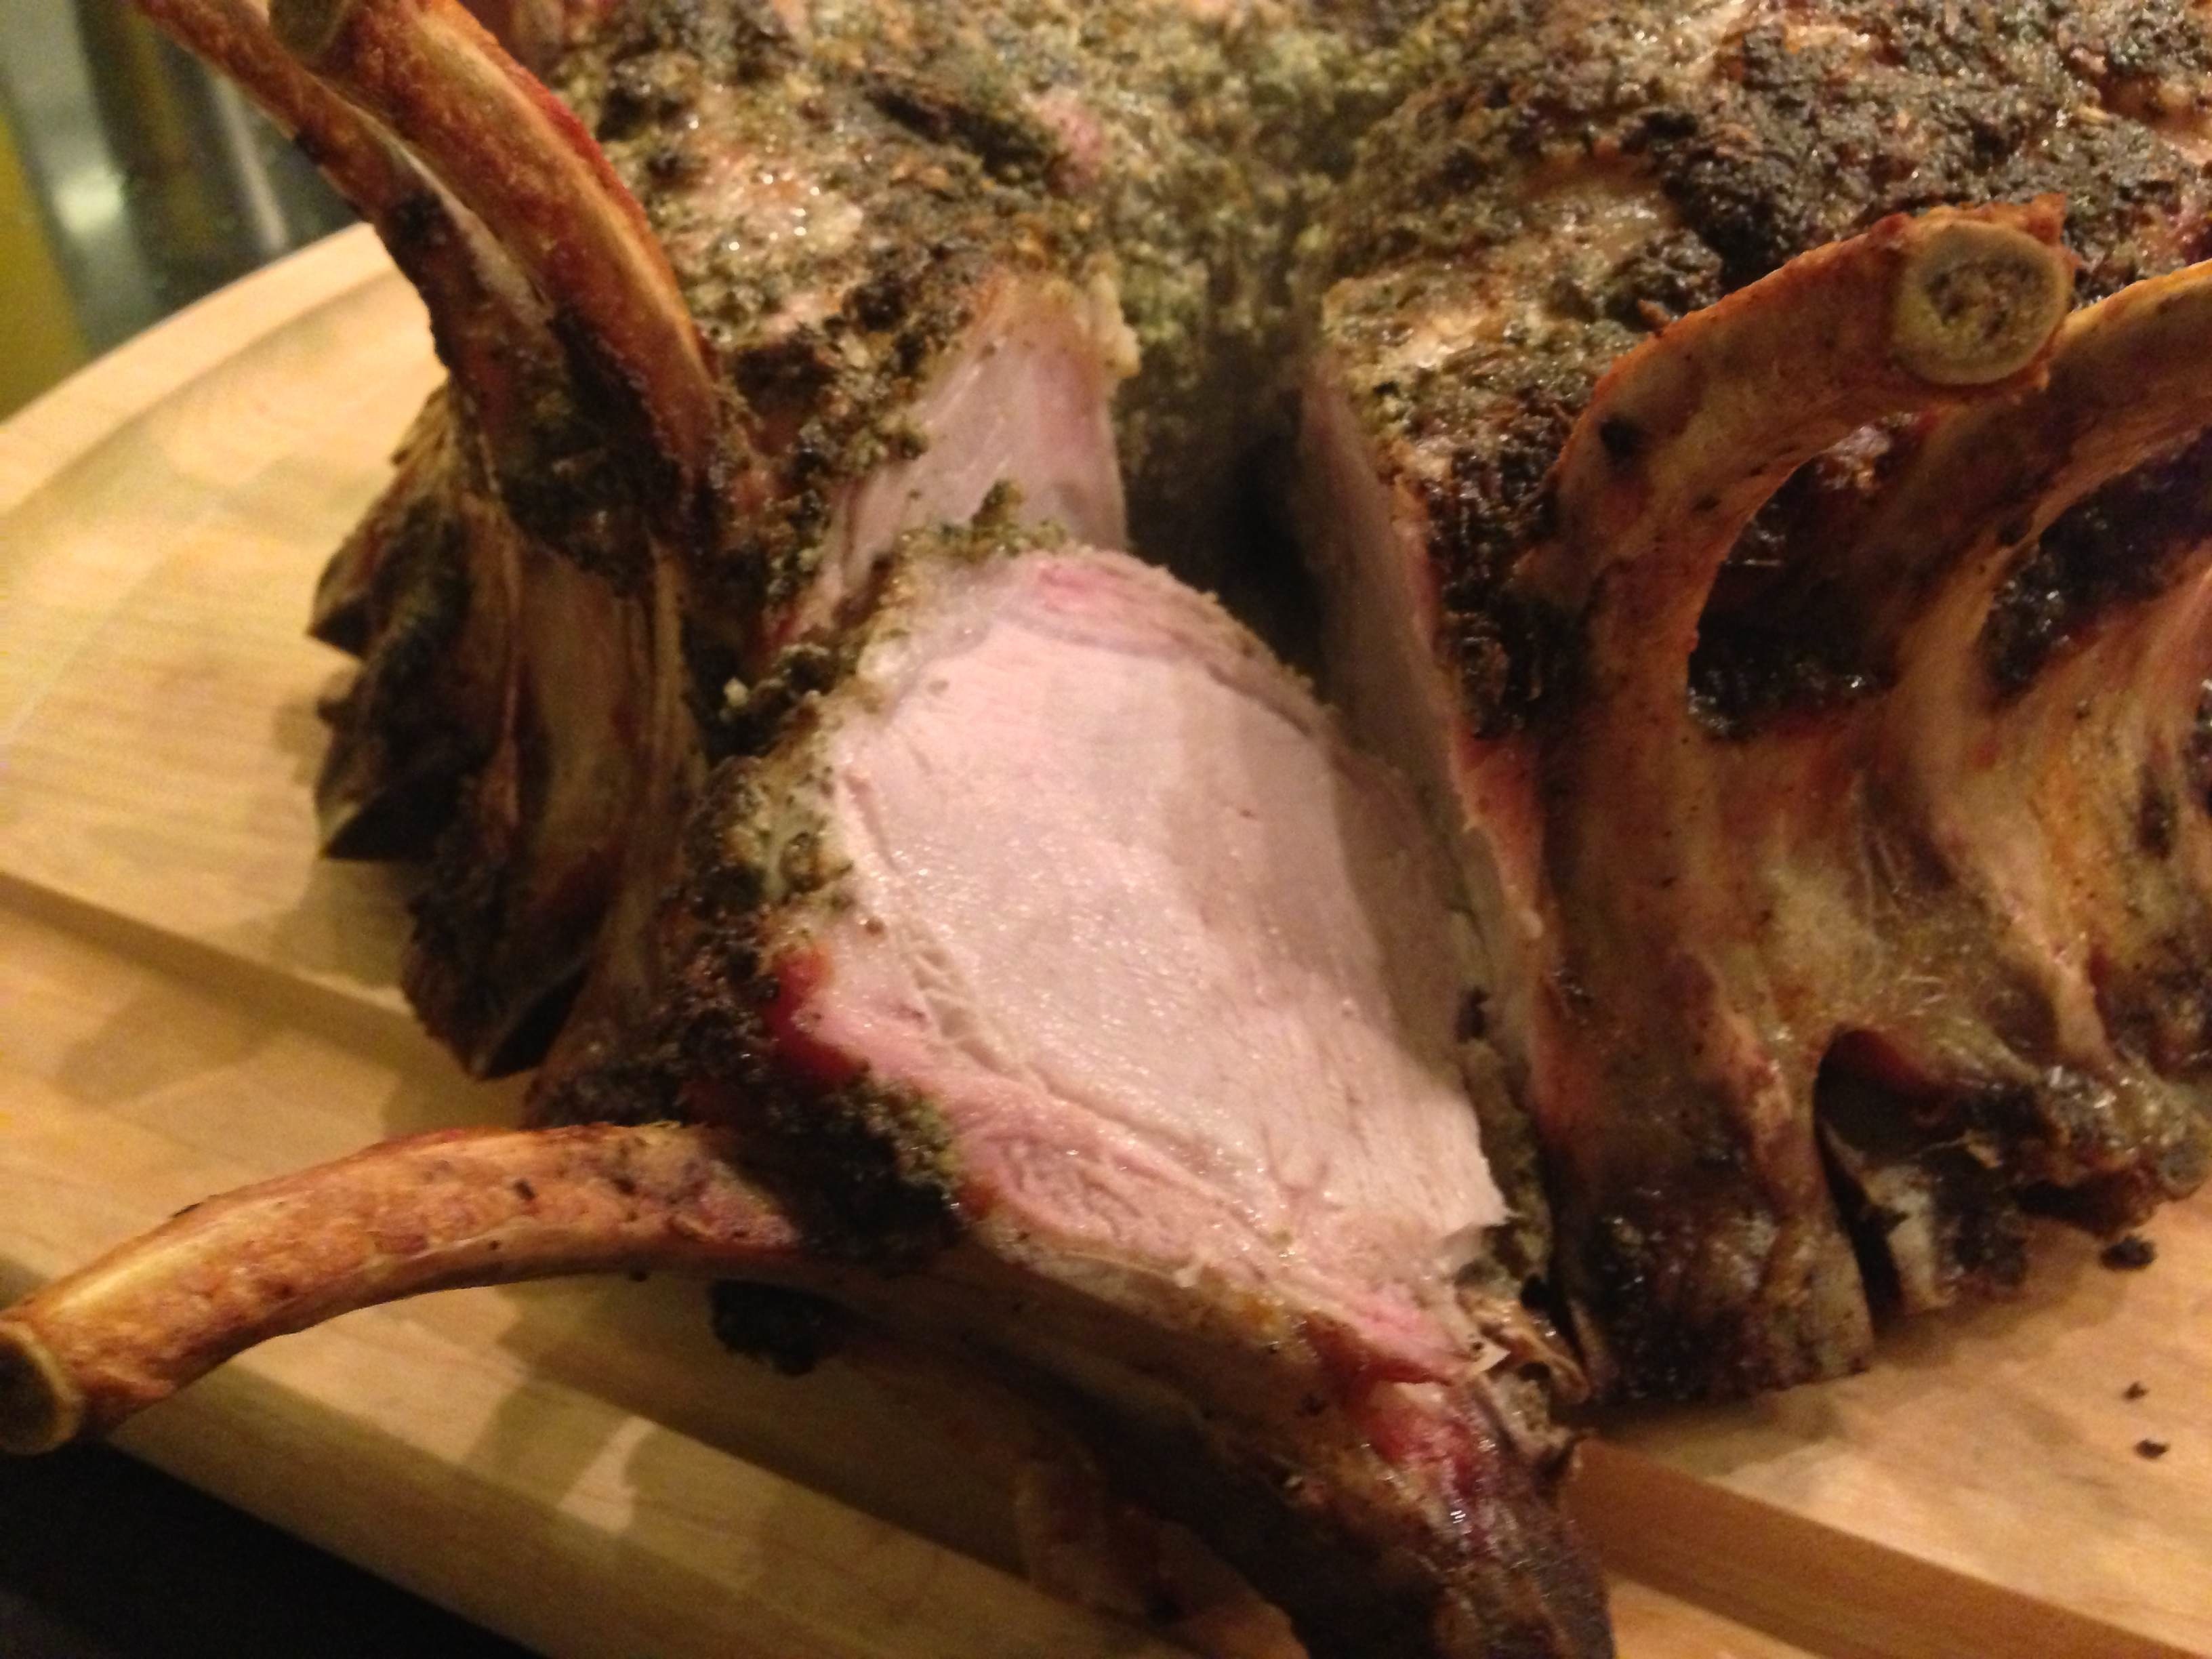 Crown roast of pork with succulent chop cut from first cut.